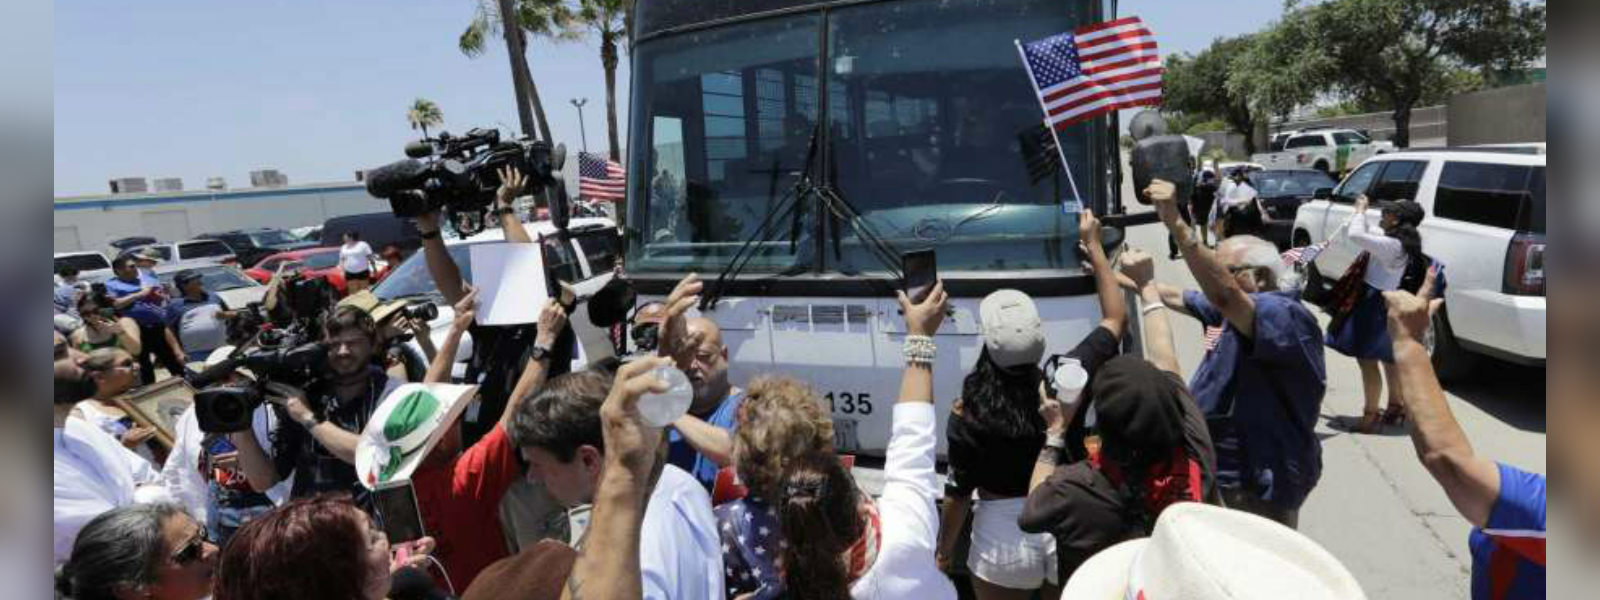 Protesters encounter bus with immigrant kids